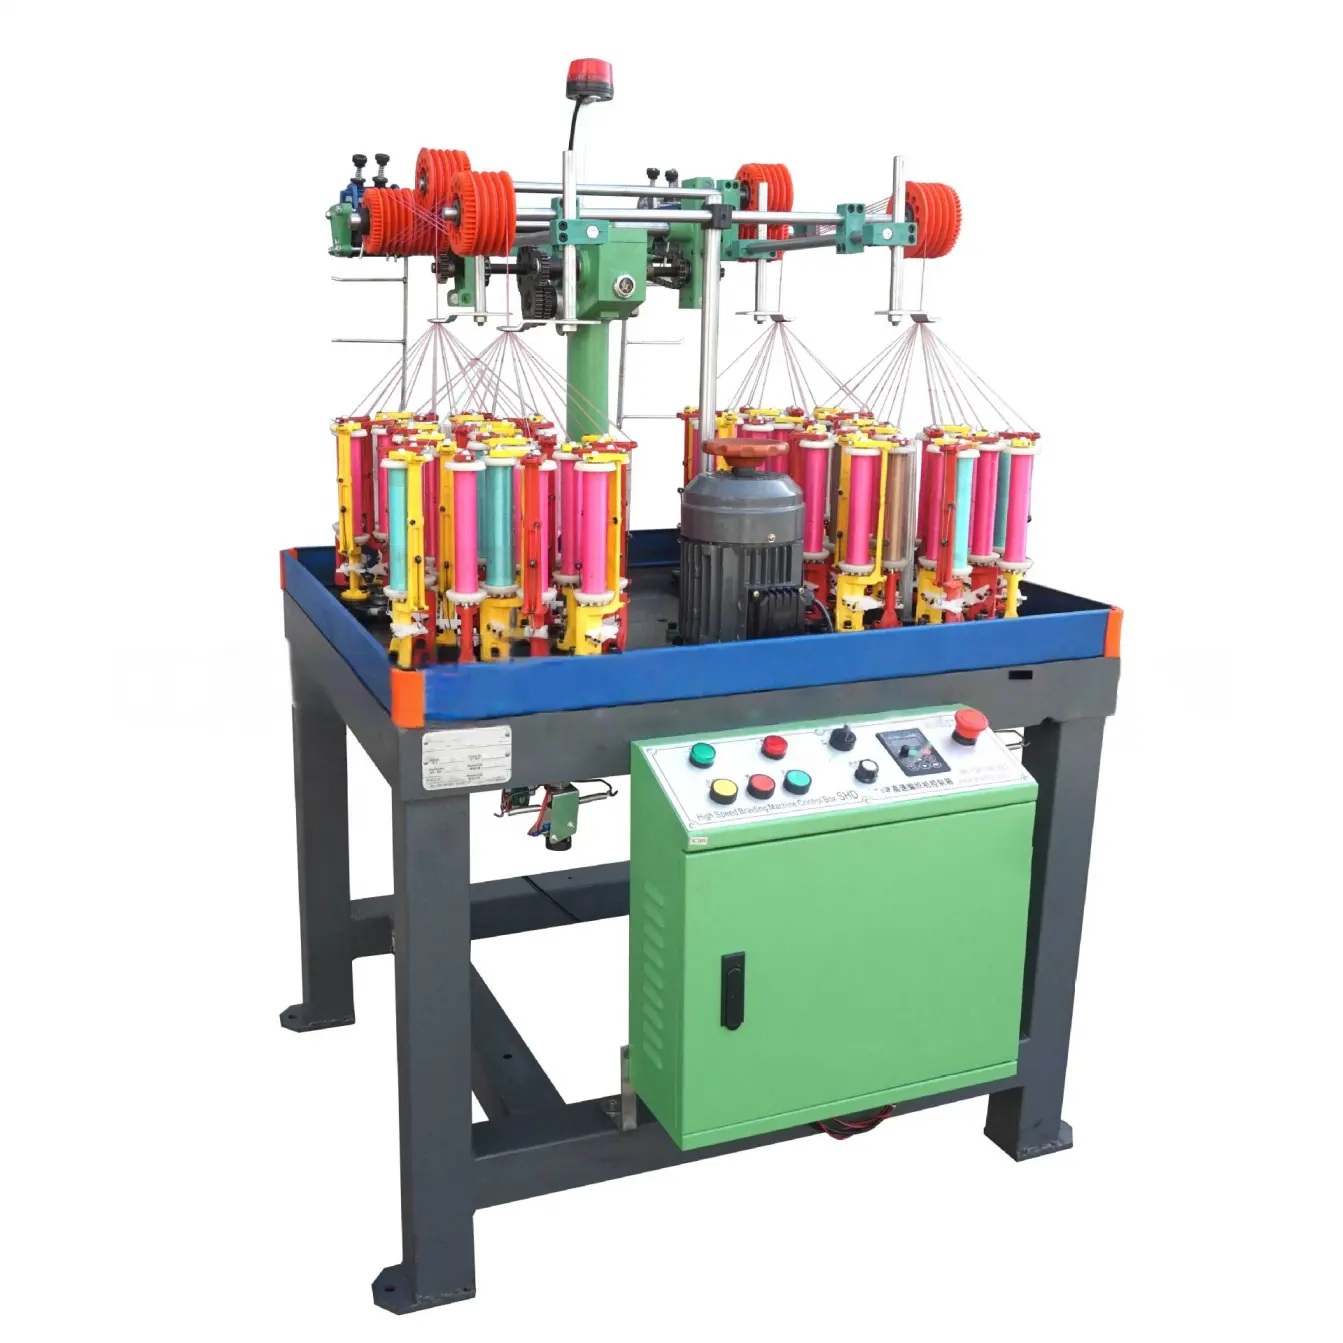 Spindle Stainless Steel Braided Flex Automatic Shoelace Braiding Machine Cord Rope Knitting Machine